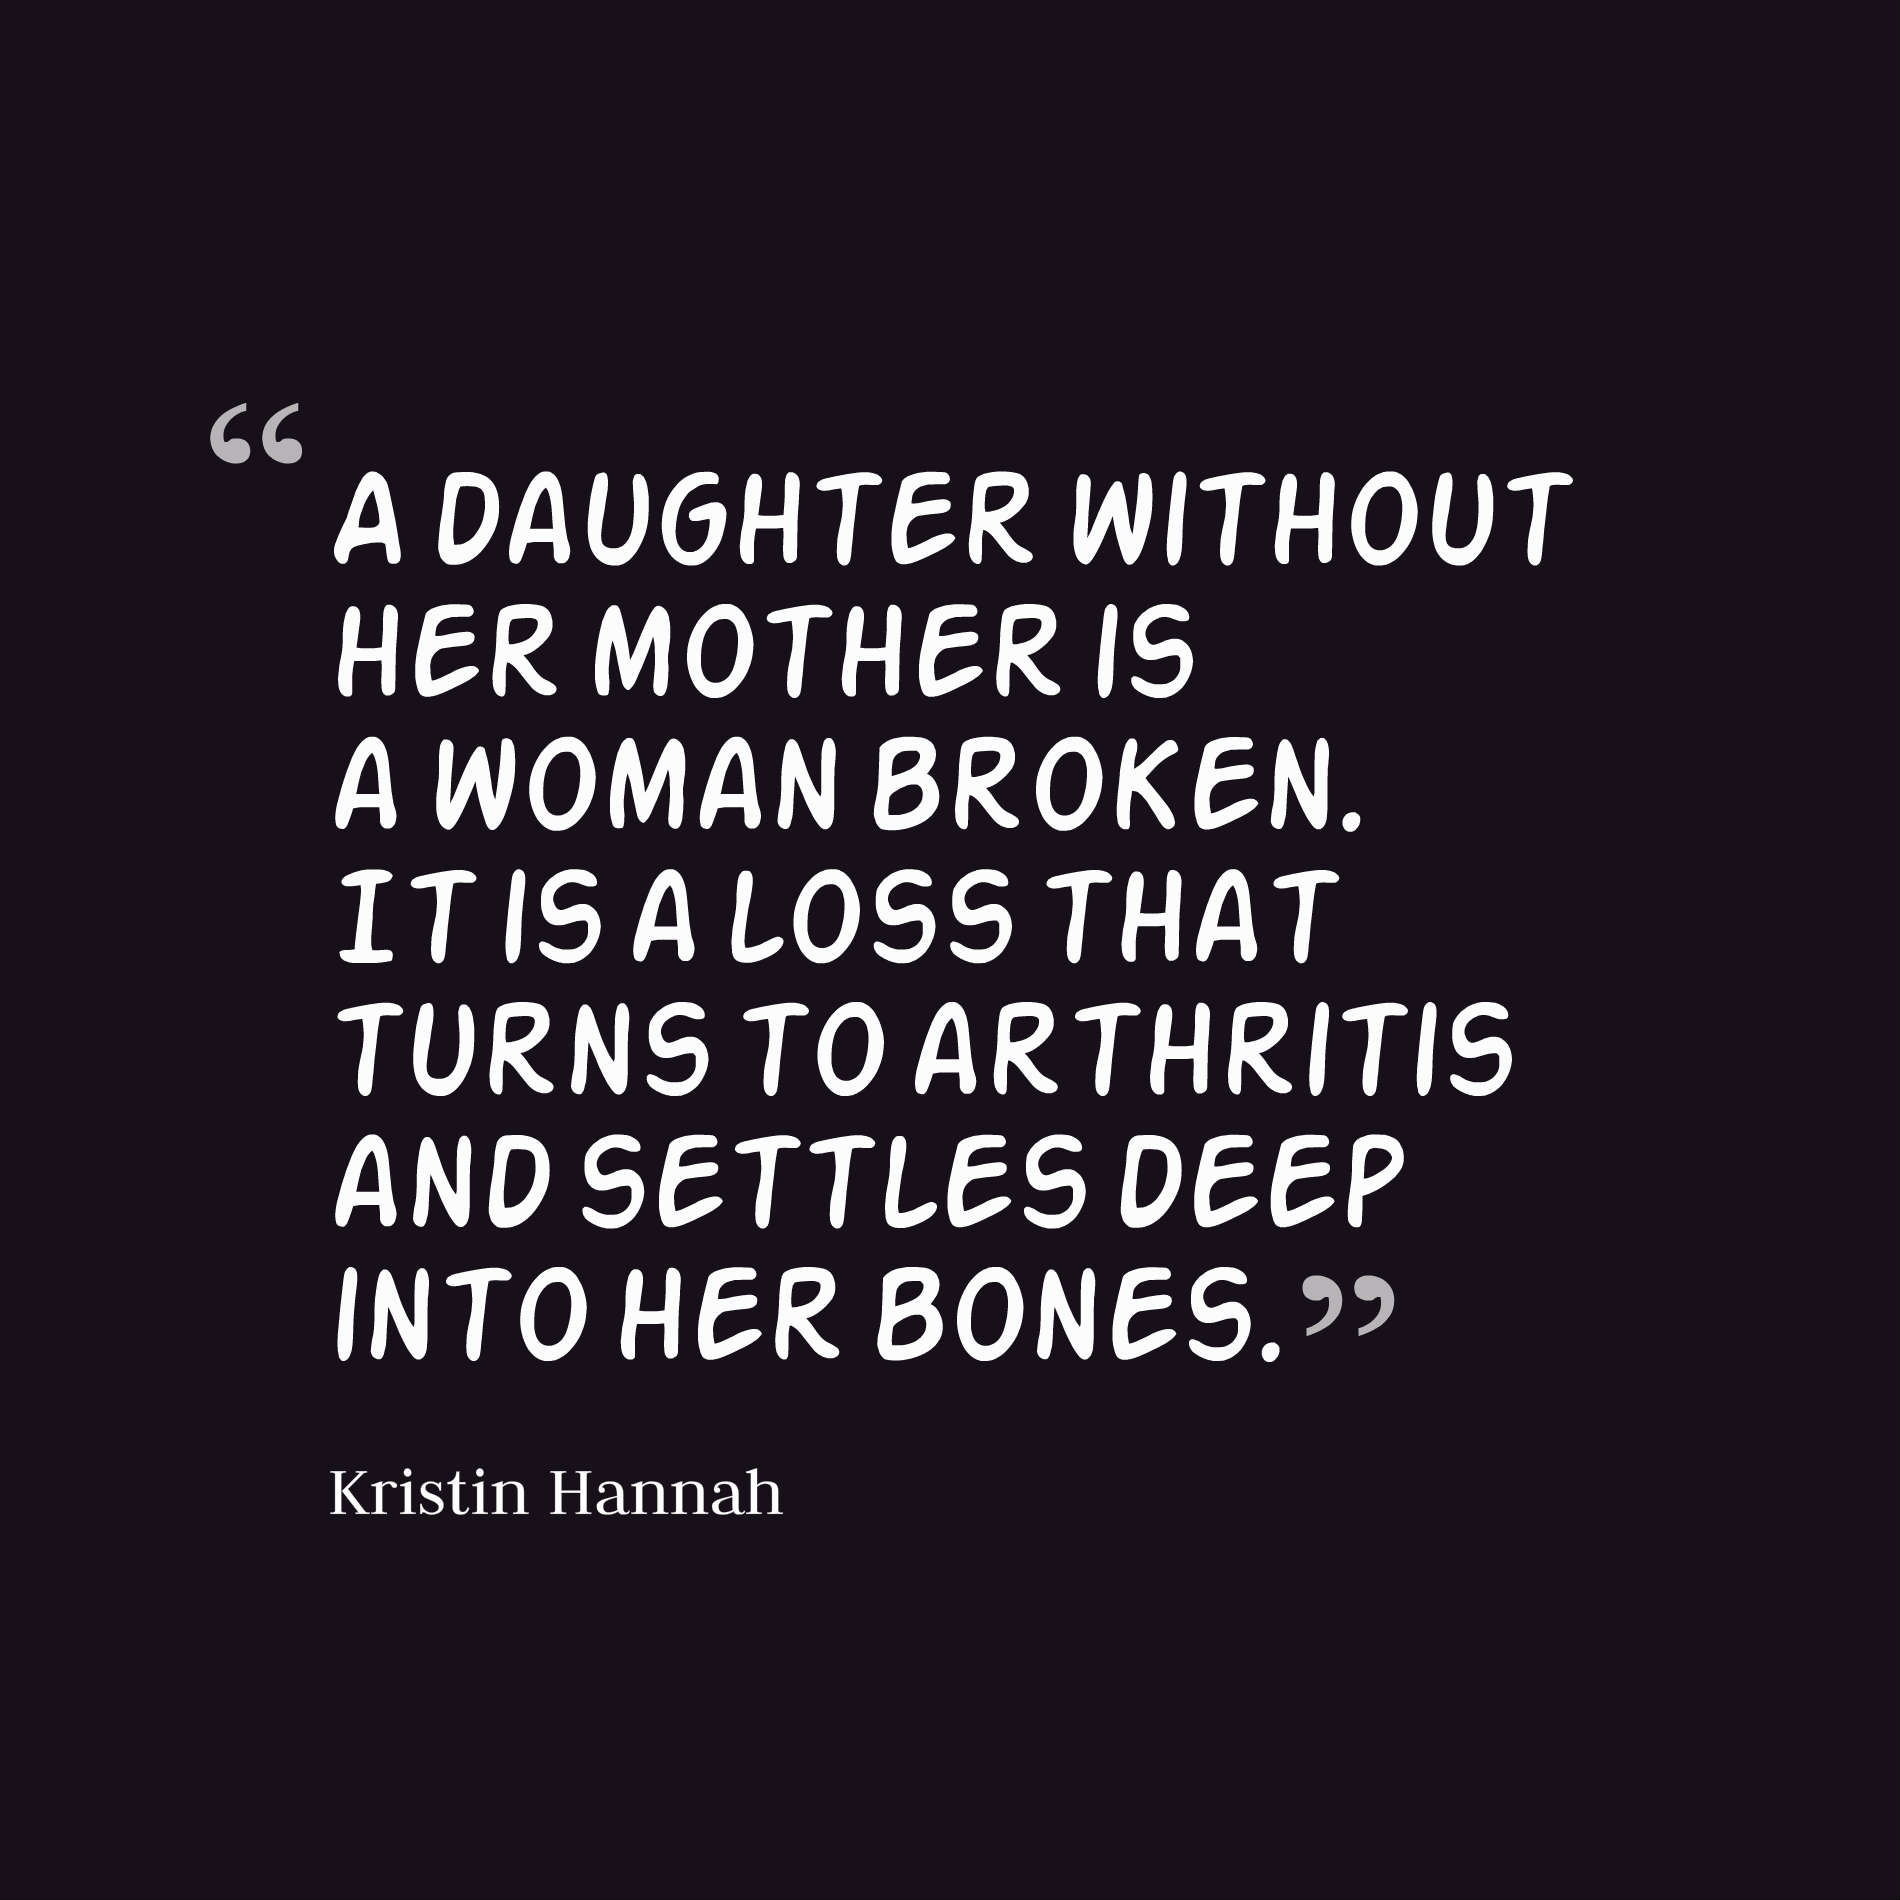 A daughter without her mother is a woman broken. It is a loss that turns to arthritis and settles deep into her bones.